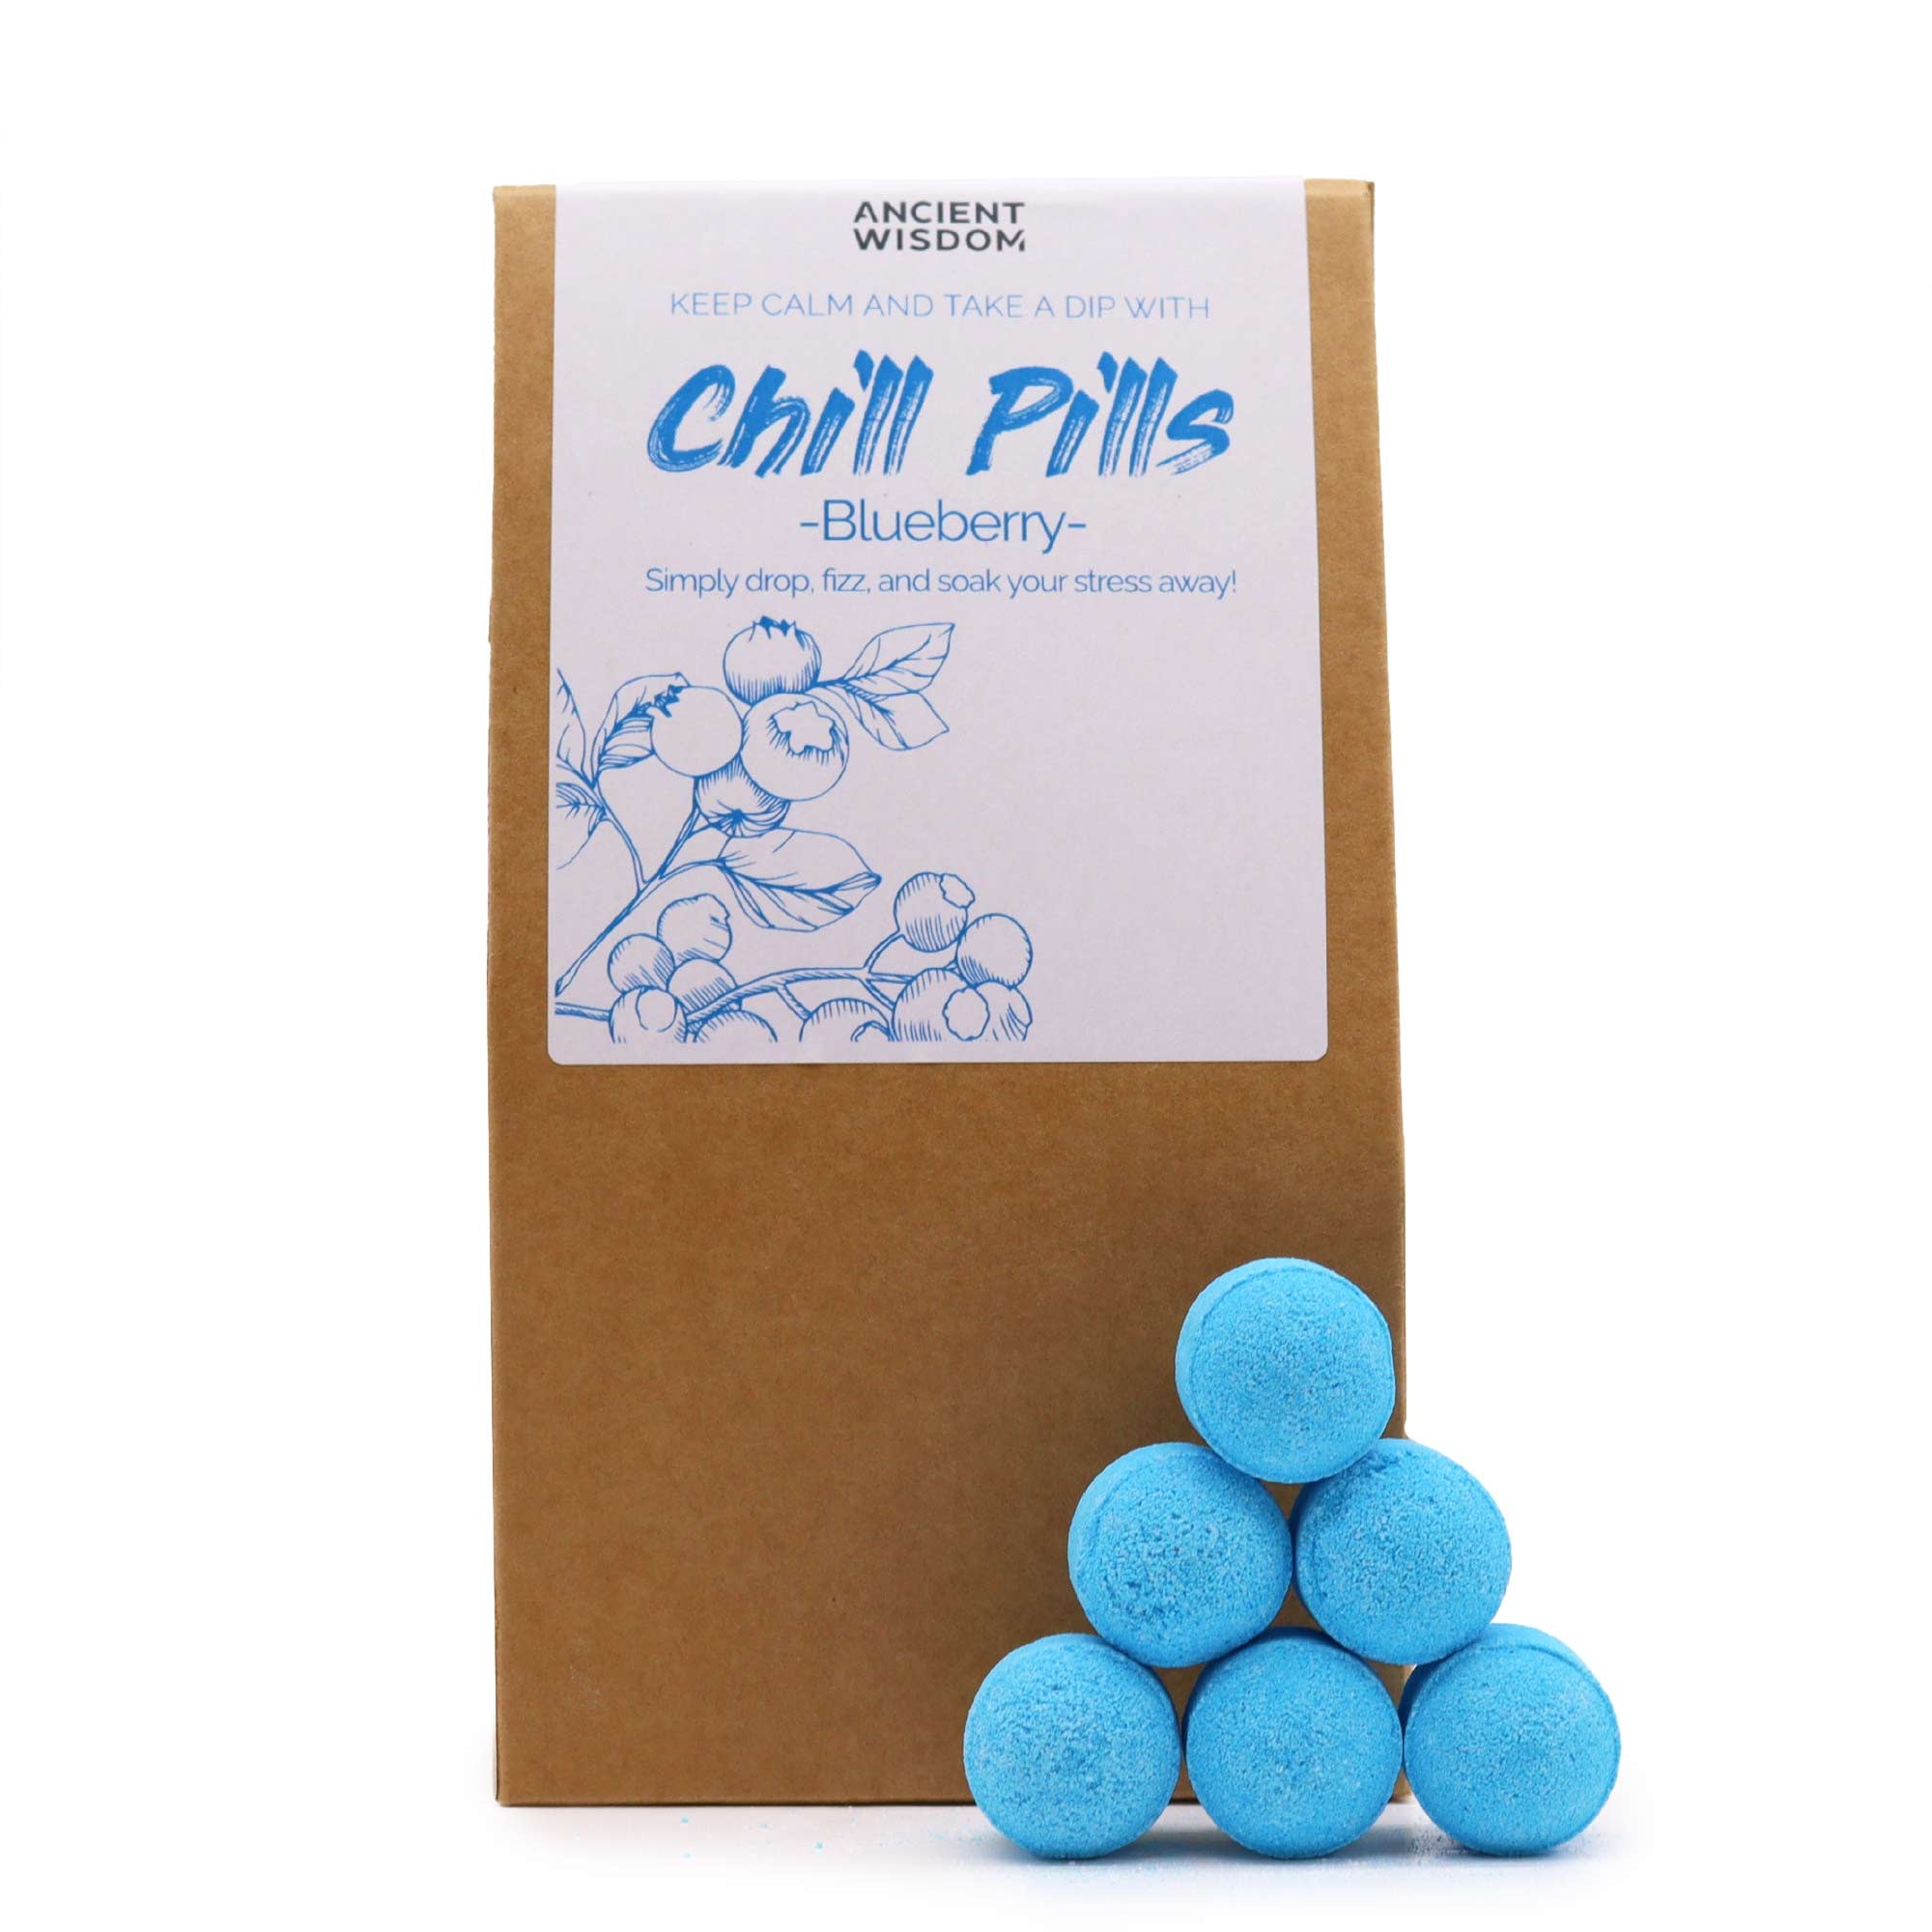 View Chill Pills Gift Pack 350g Blueberry information